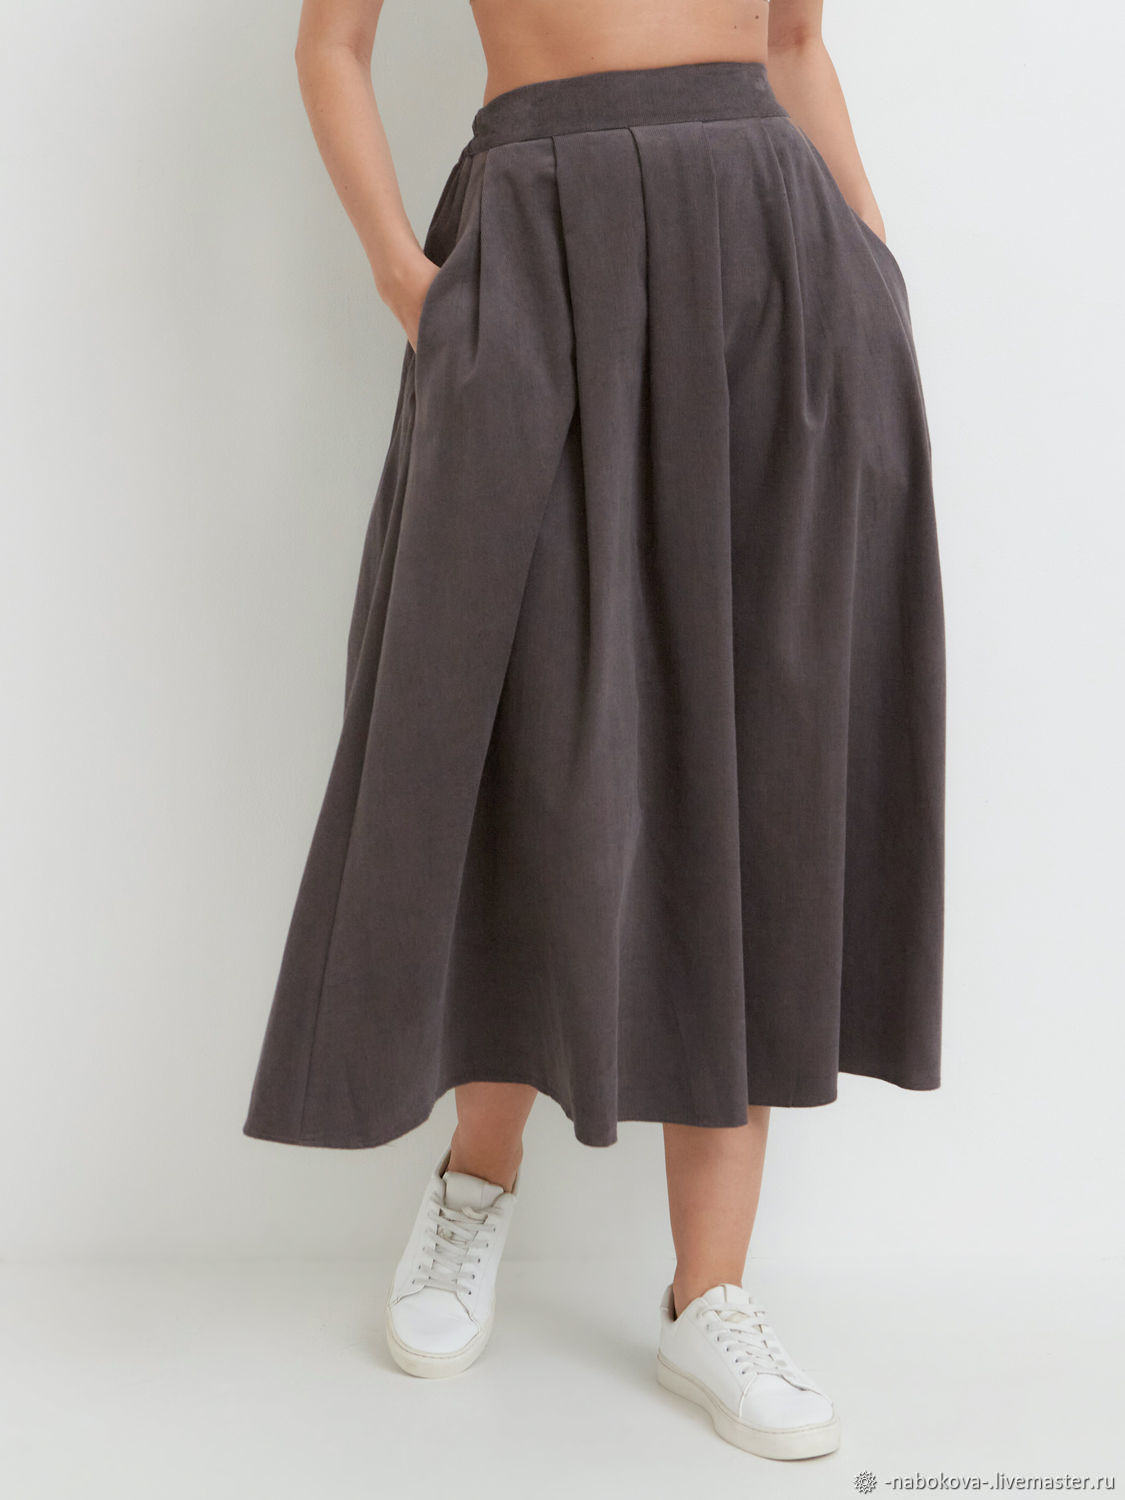 Corduroy midi skirt in gray-purple color, Skirts, Moscow,  Фото №1